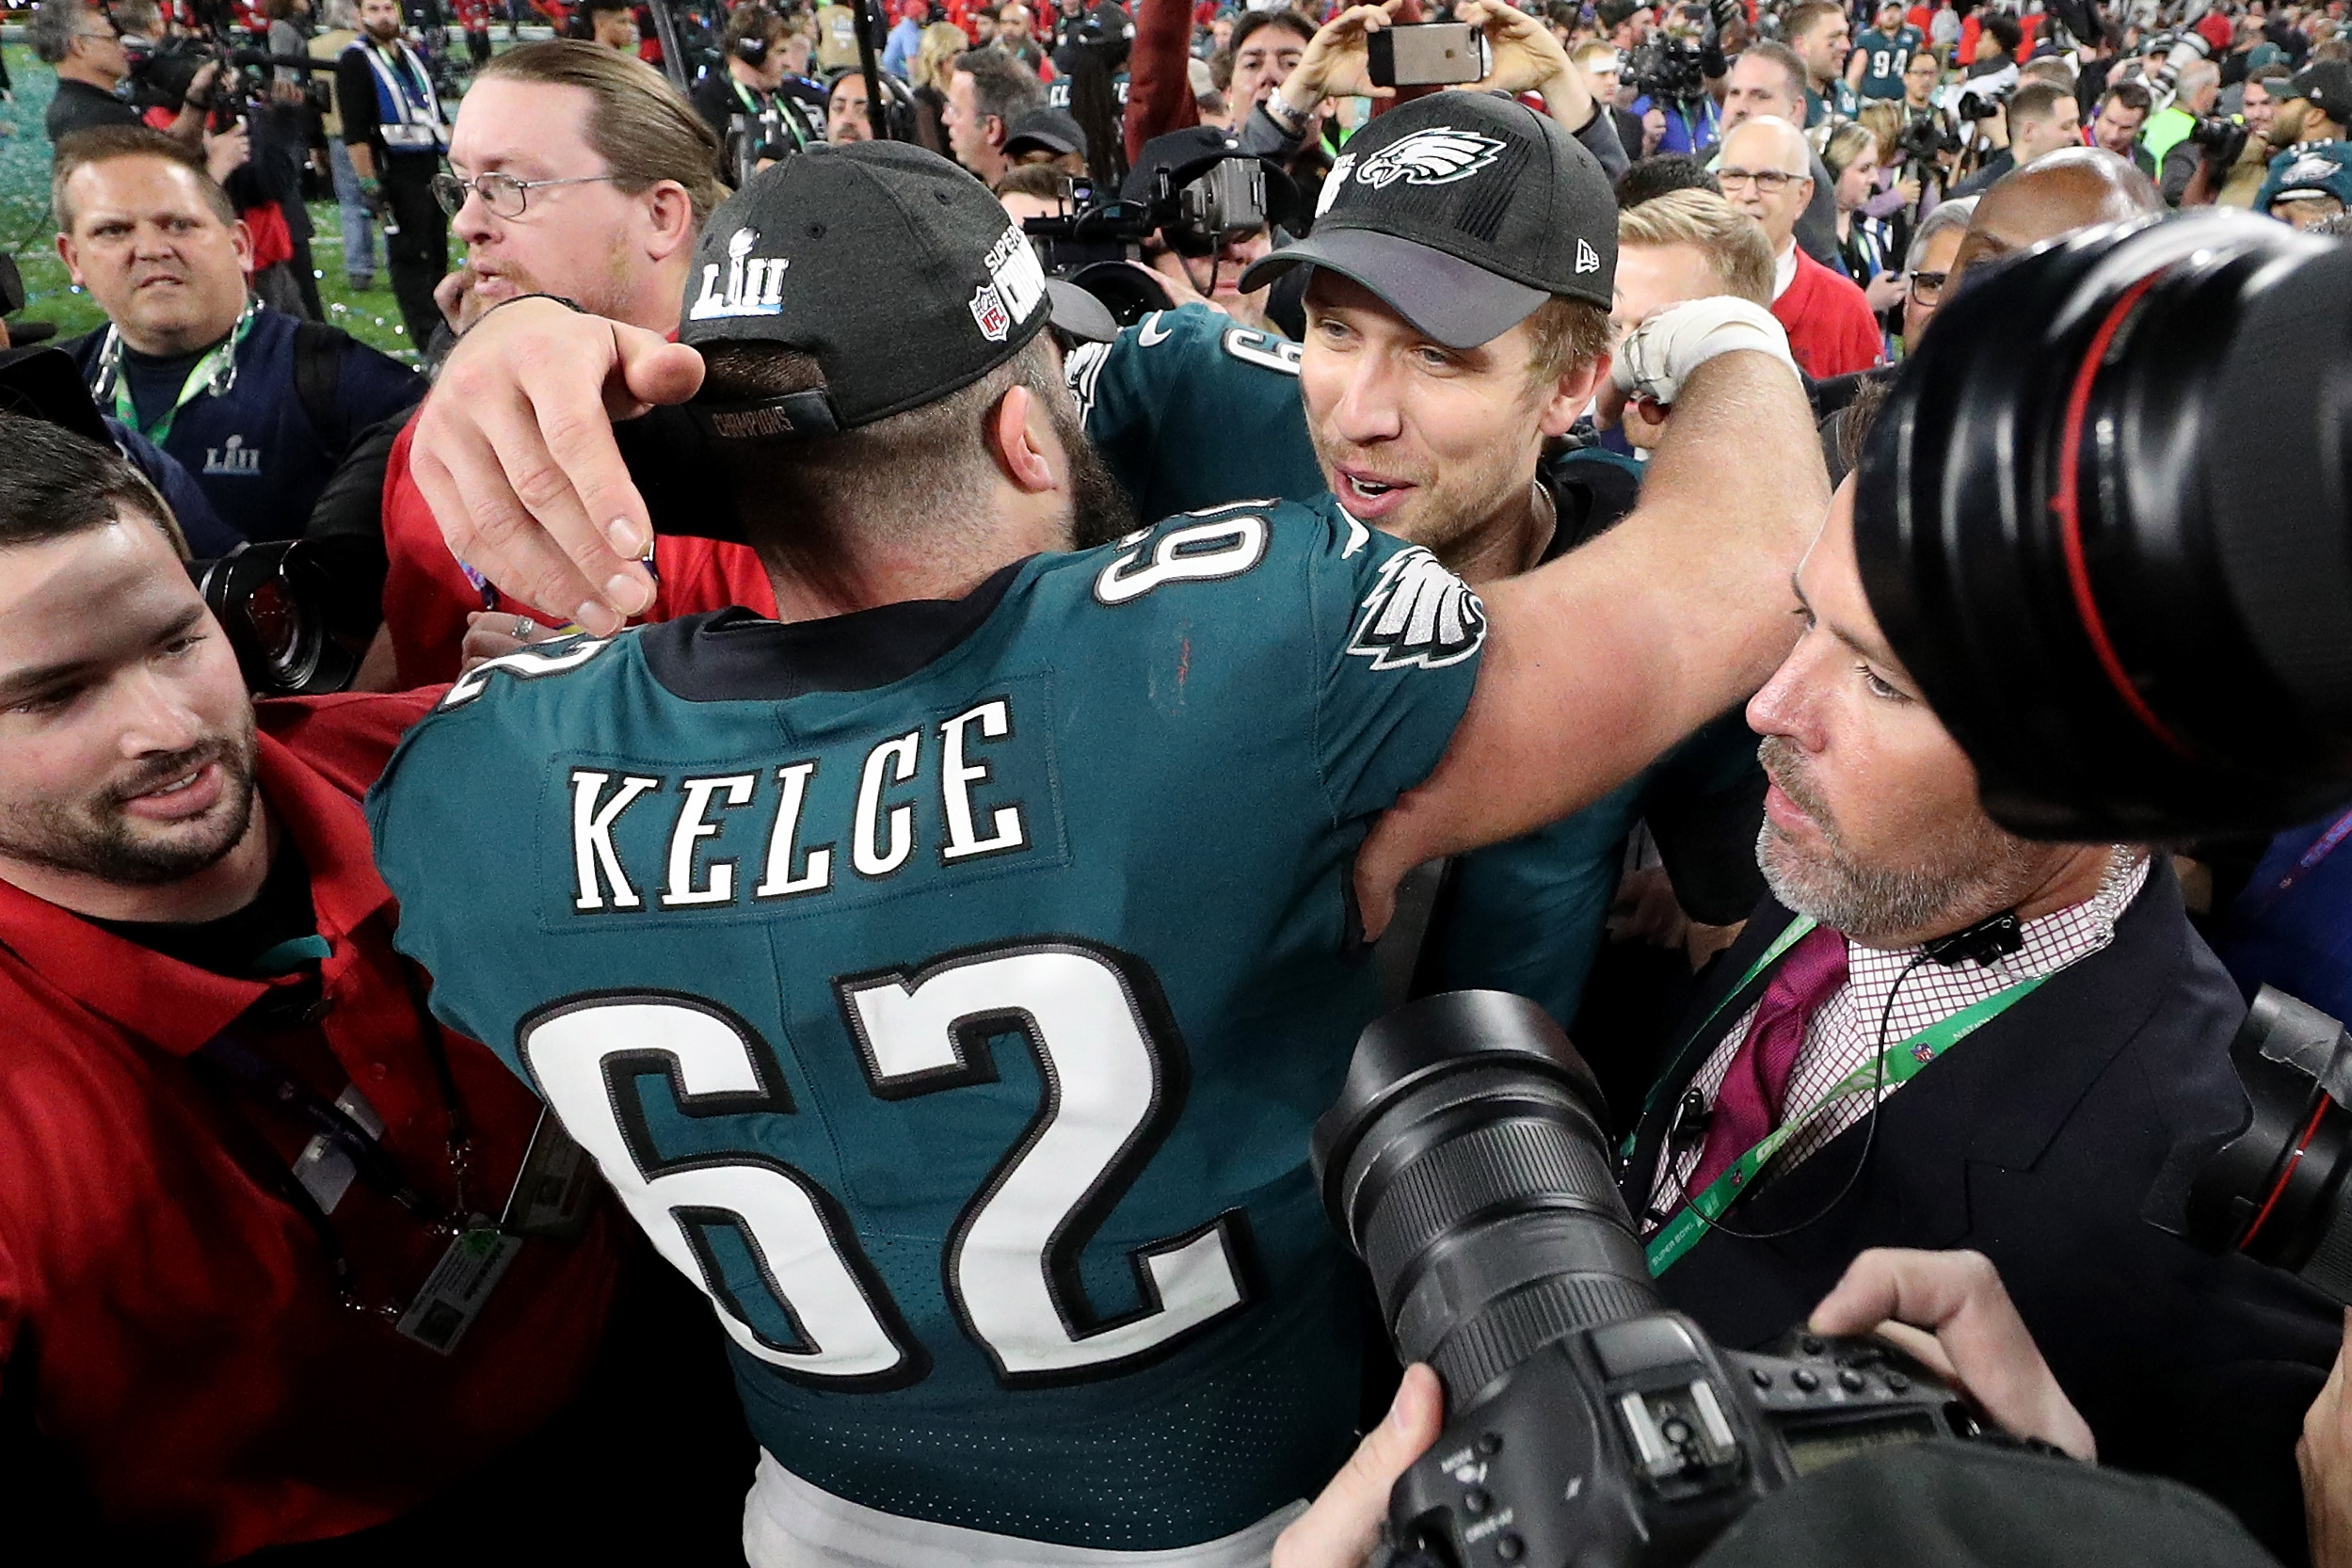 MINNEAPOLIS, MN - FEBRUARY 04: Nick Foles #9 of the Philadelphia Eagles celebrates with Jason Kelce #62 after defeating the New England Patriots 41-33 in Super Bowl LII at U.S. Bank Stadium on February 4, 2018 in Minneapolis, Minnesota. Patrick Smith/Getty Images